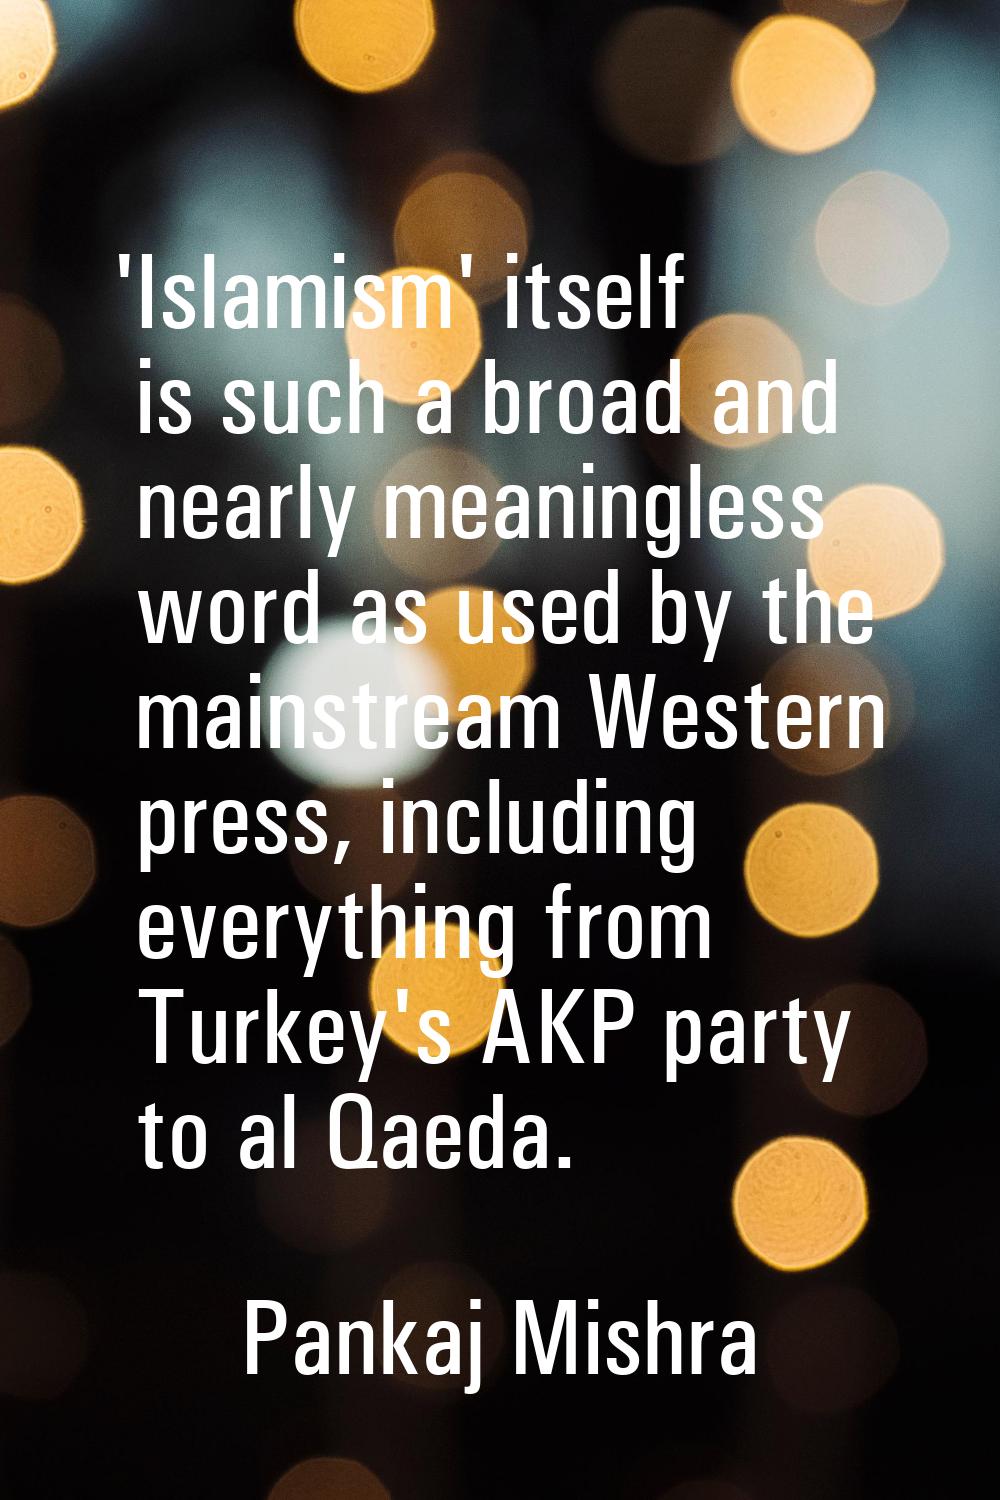 'Islamism' itself is such a broad and nearly meaningless word as used by the mainstream Western pre